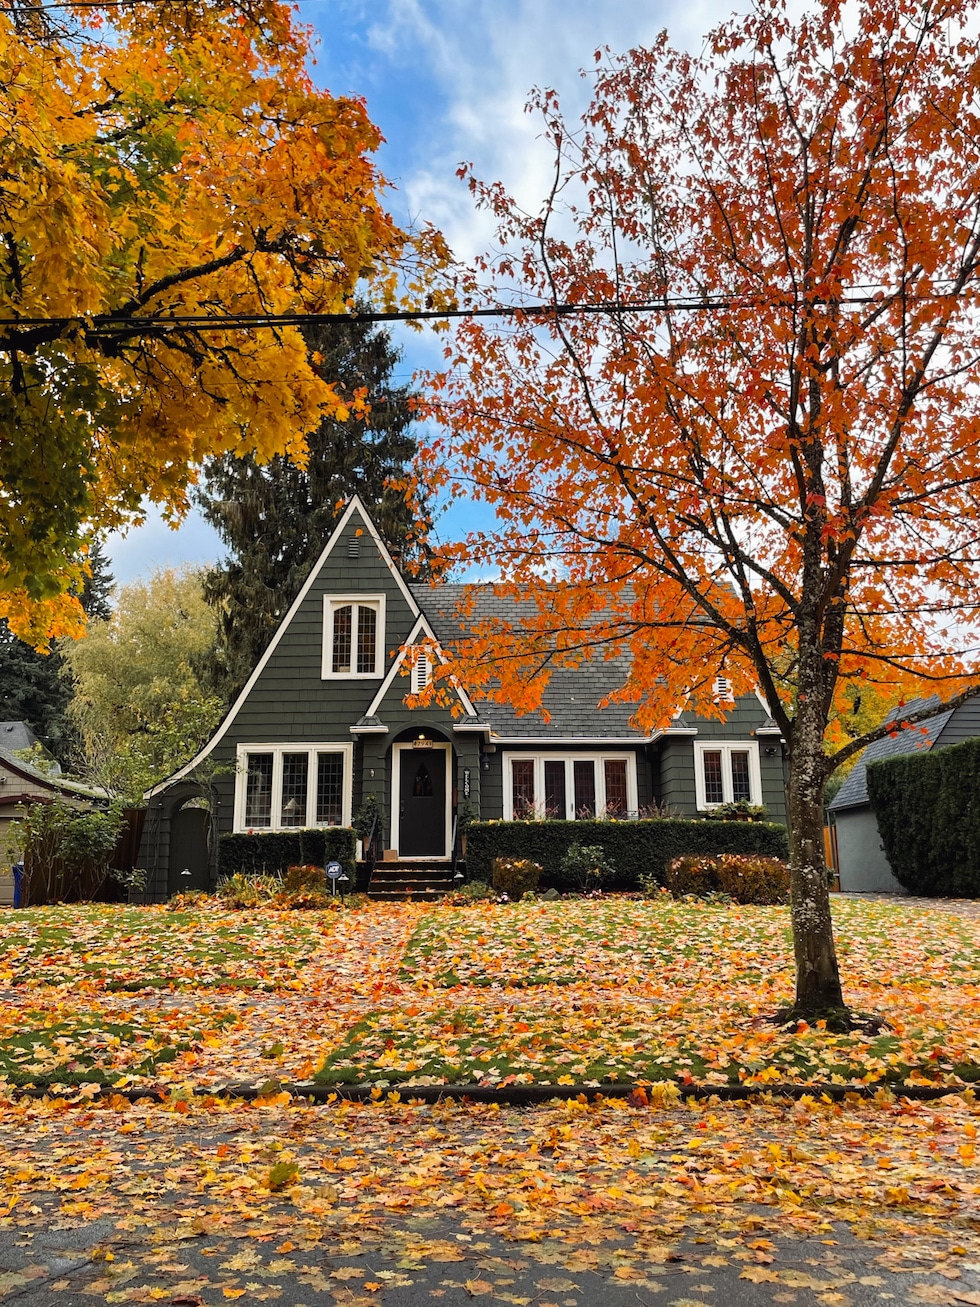 Charming Homes in Autumn (two of our family's past homes in Portland!)